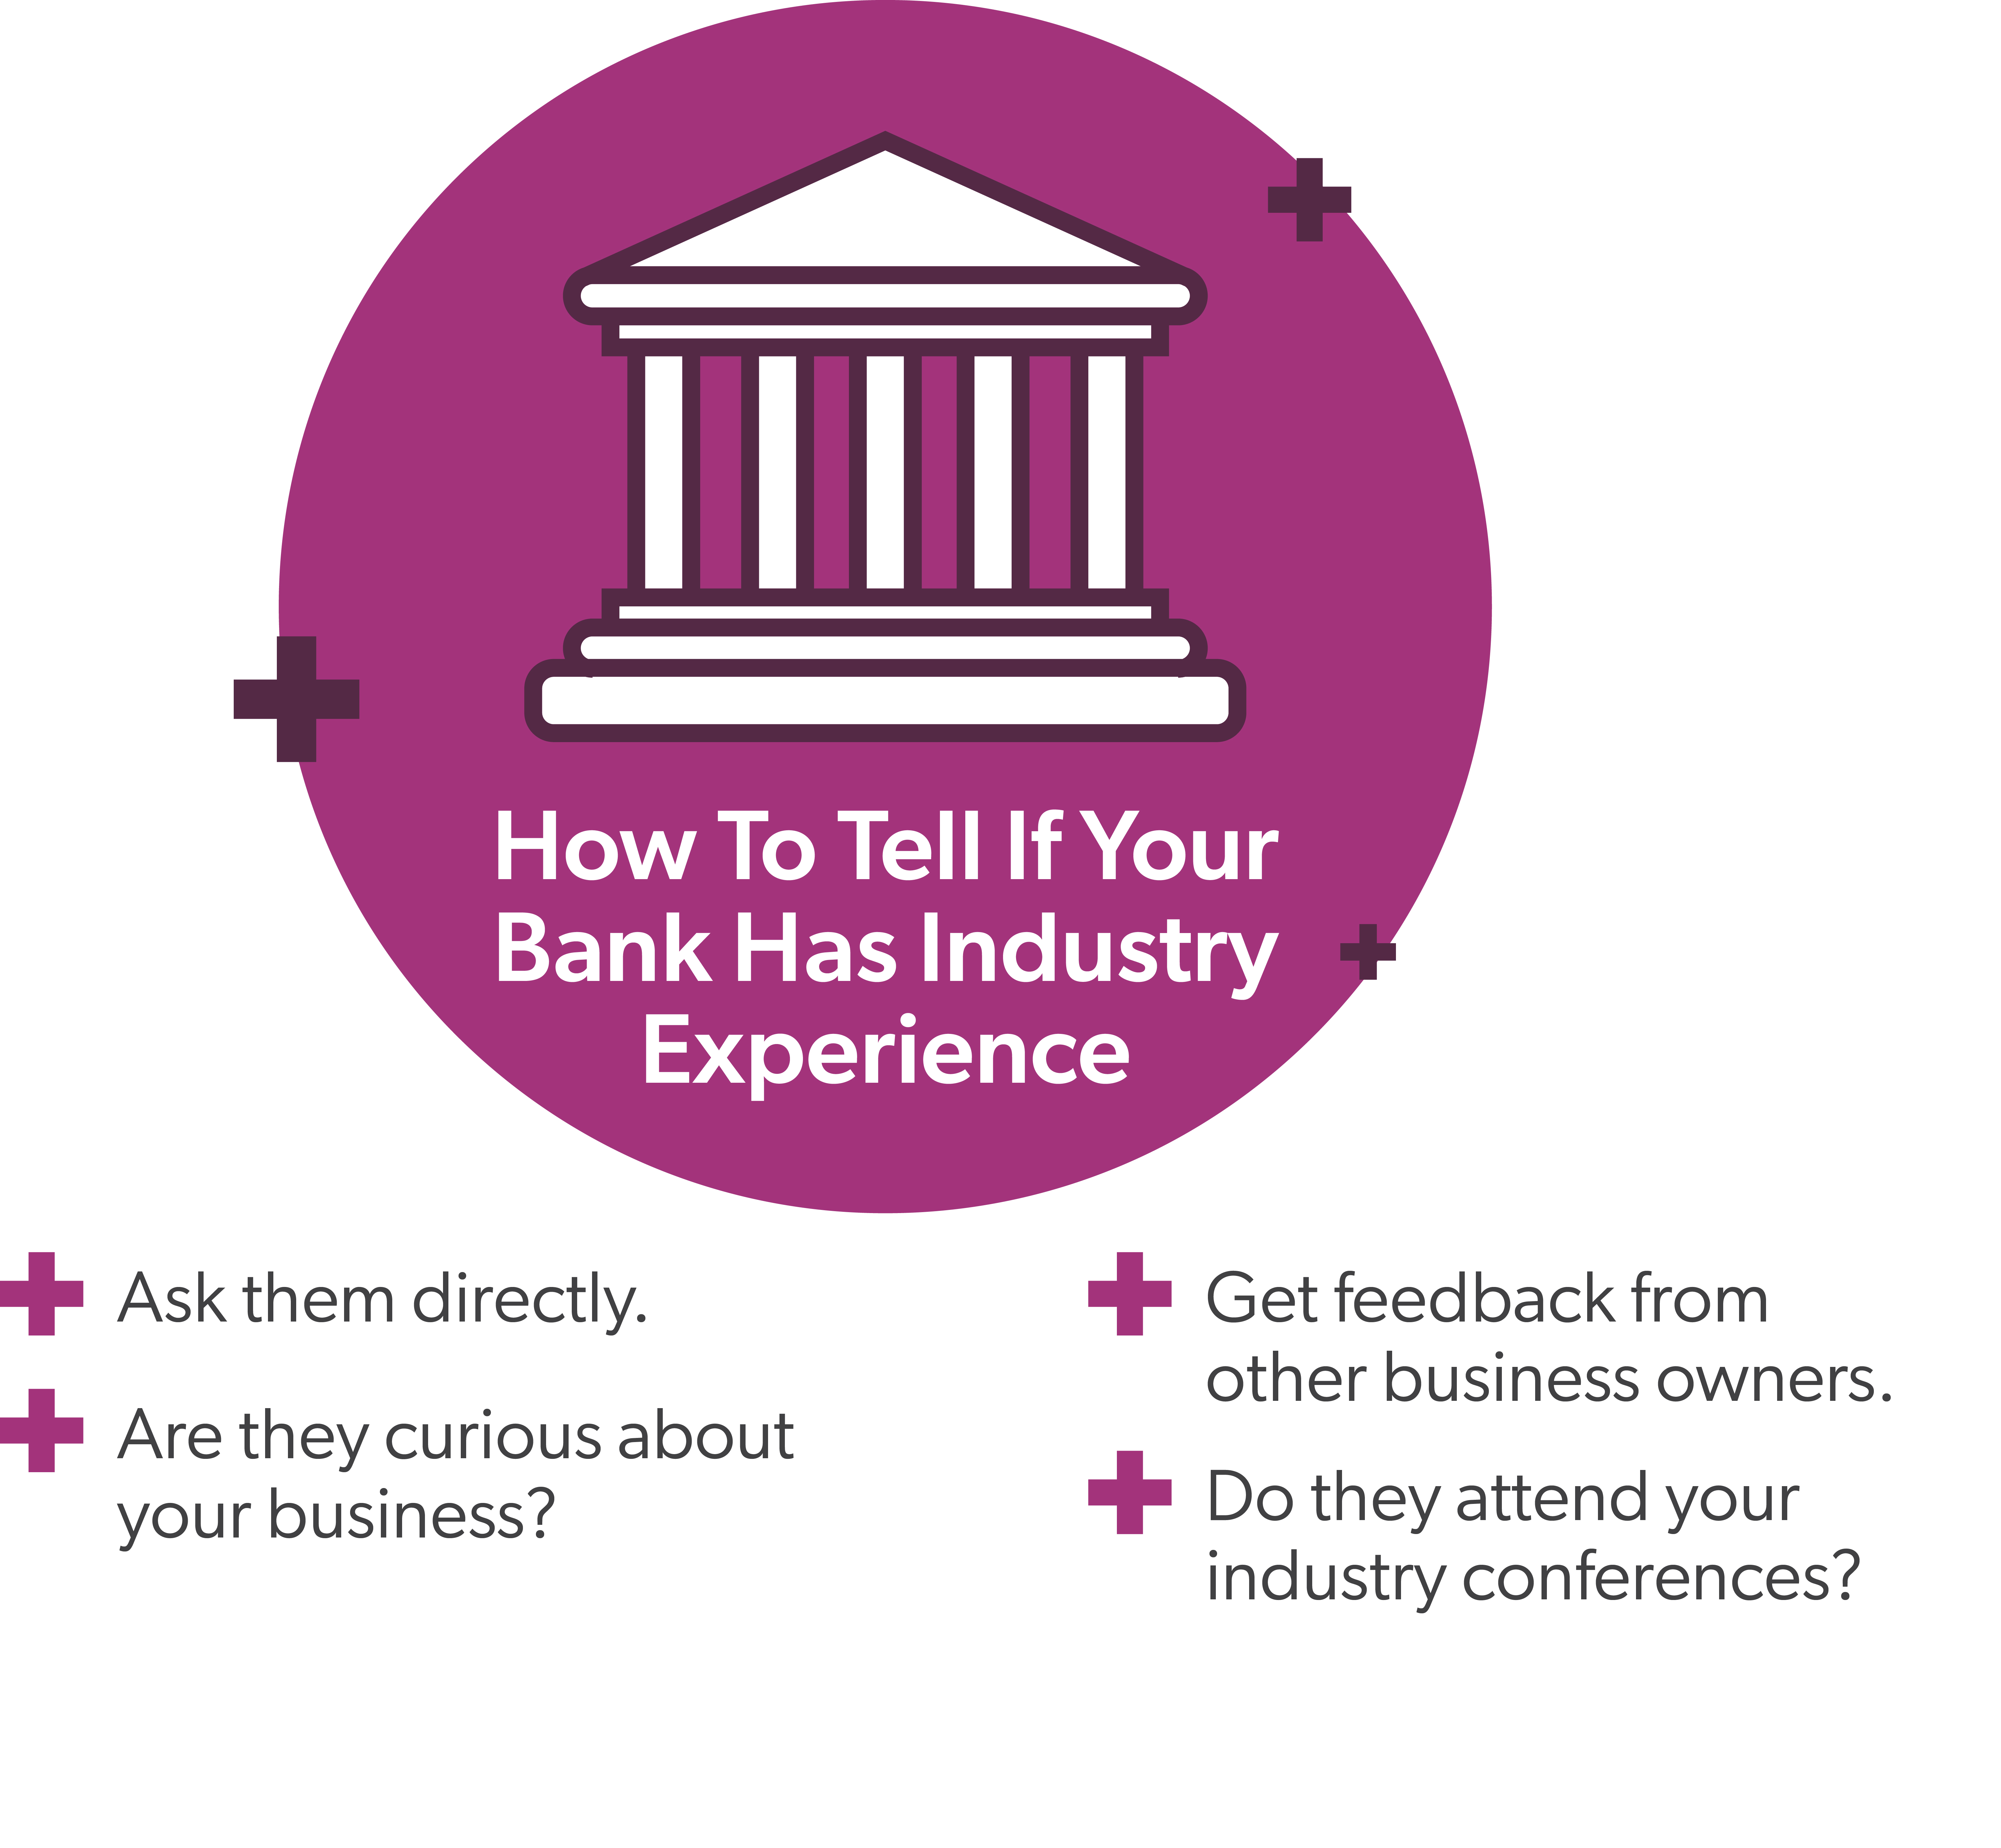 How to tell if your bank has industry experience